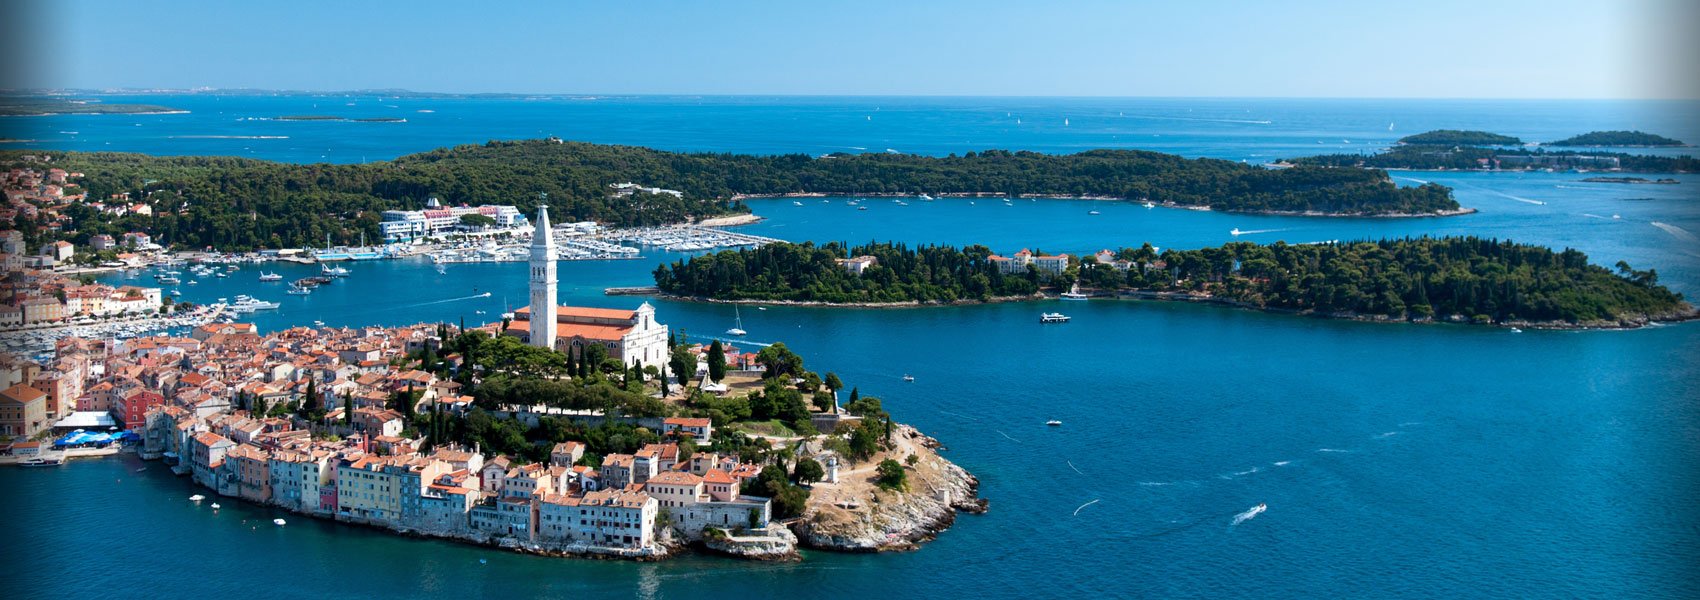 Rovinj - one of the most picturesque towns in the Mediterranean...